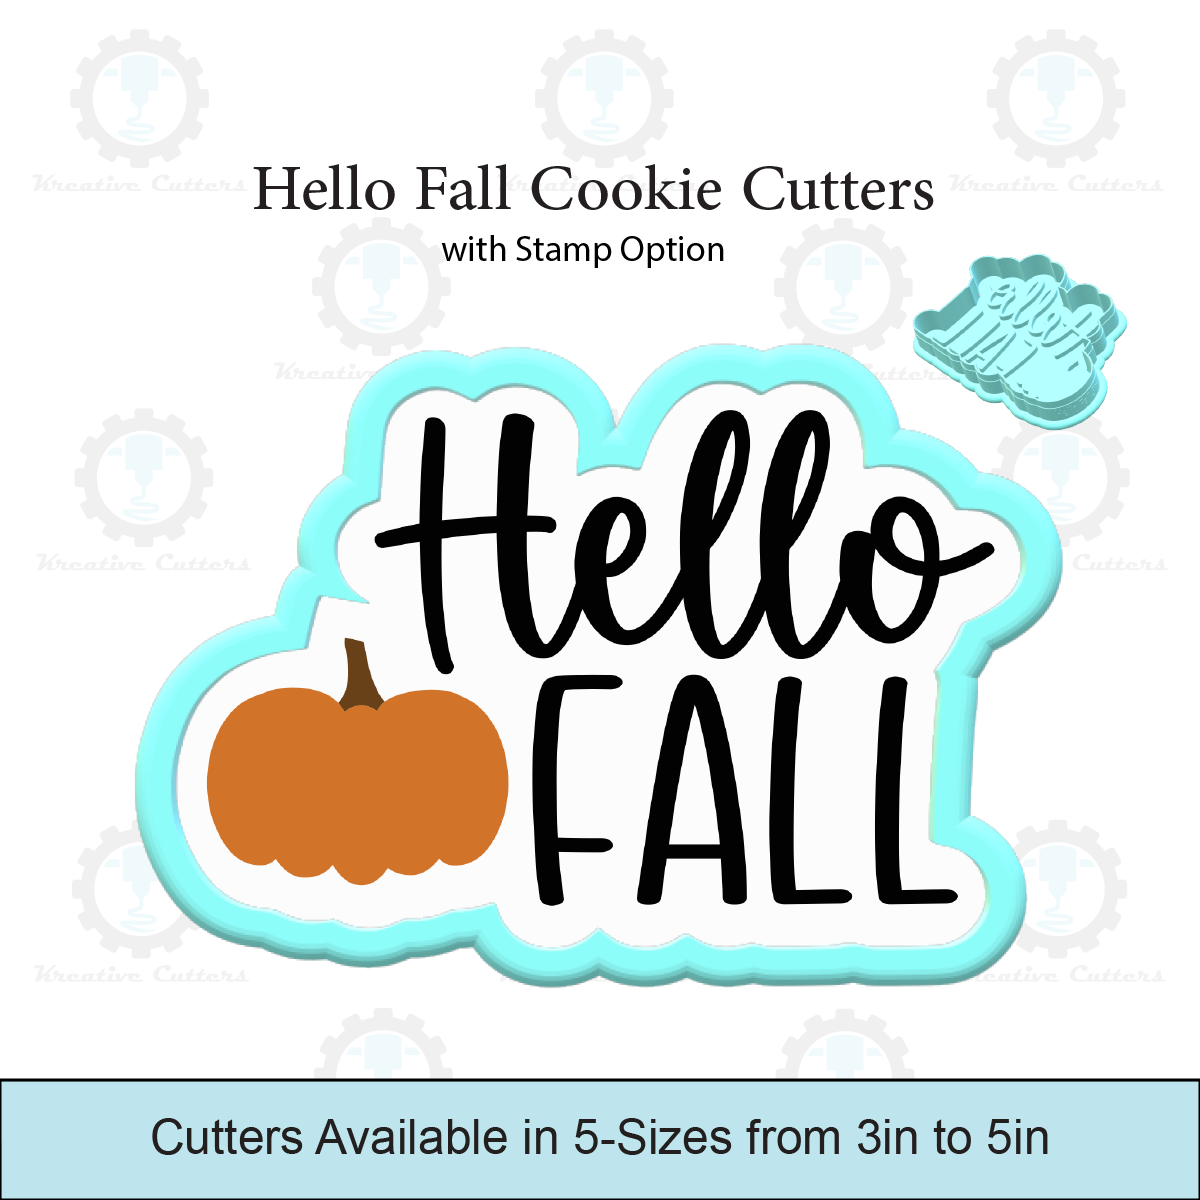 Hello Fall Cookie Cutter with Stamp Option